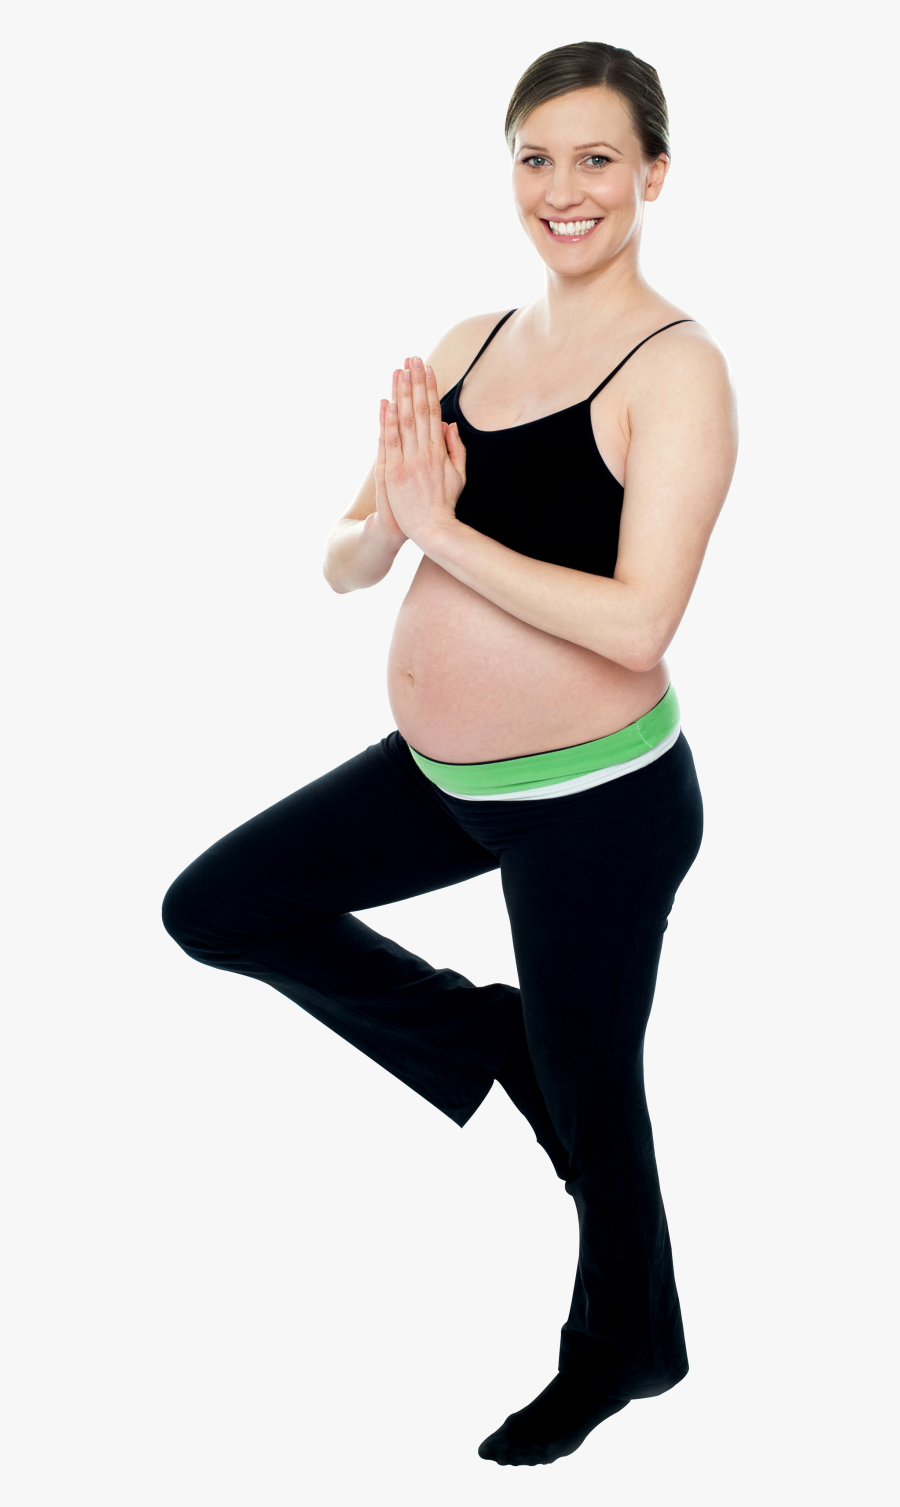 Pregnant Woman Exercise Png Image - Pregnant Exercise Png, Transparent Clipart